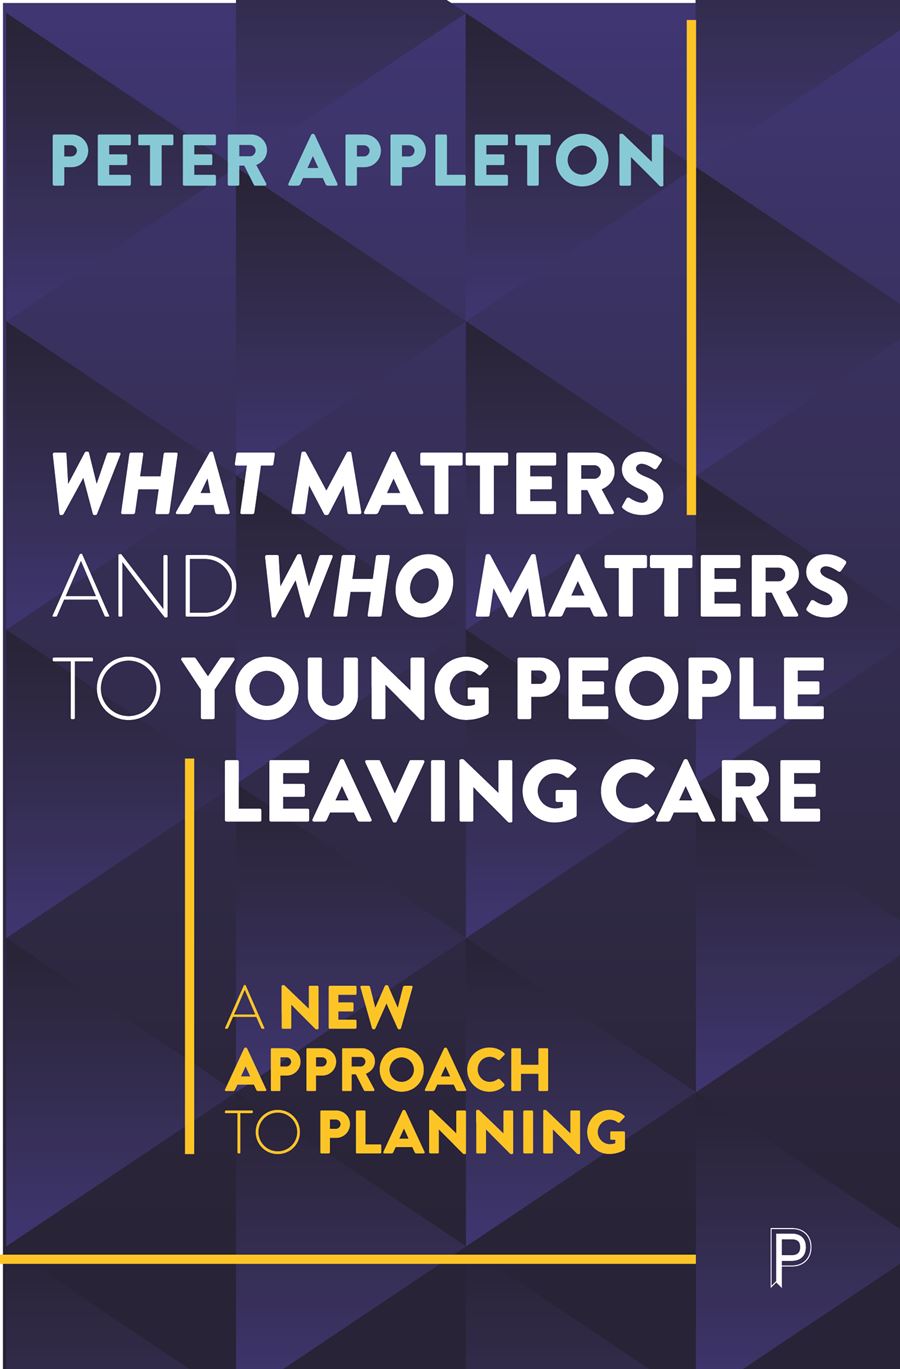 How do young people, transitioning from care, plan their future lives?